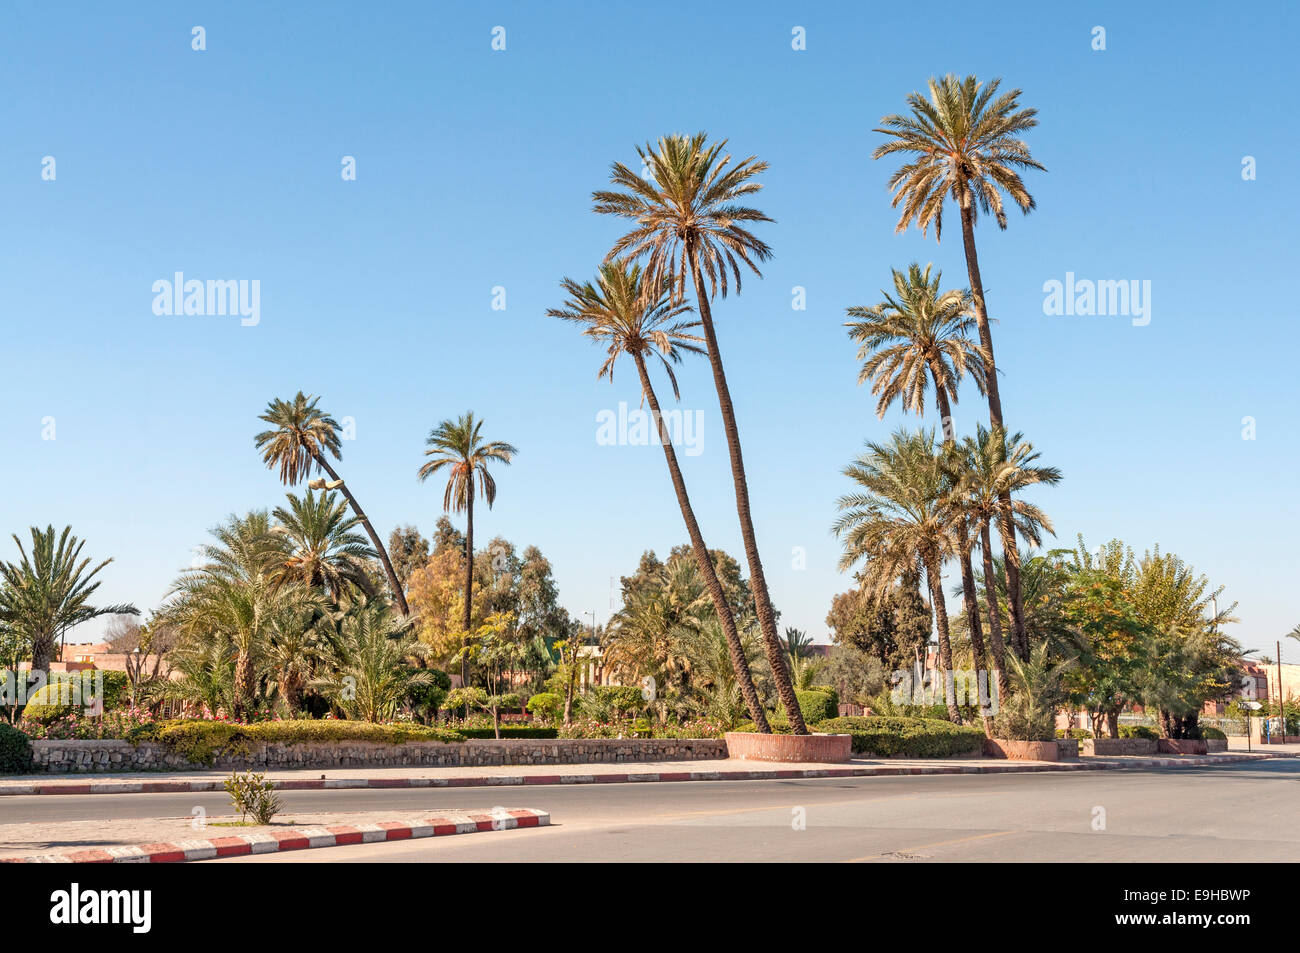 Palm trees in the city of Marrakesh, Morocco Stock Photo